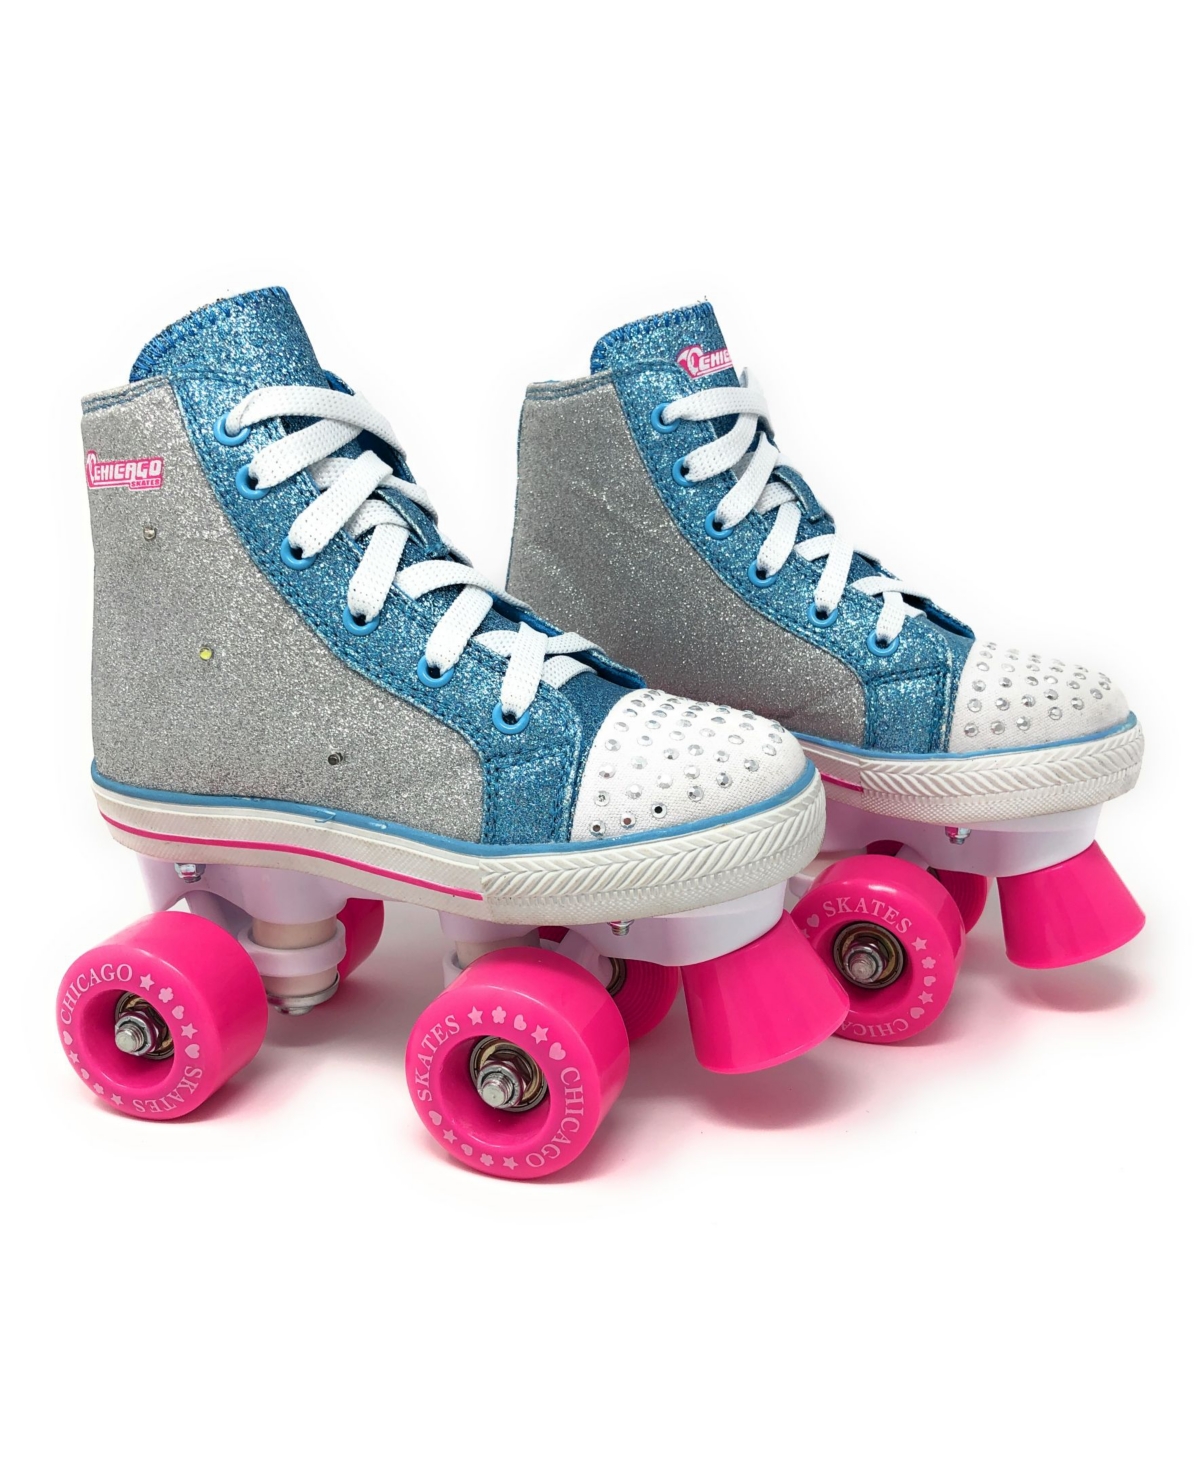 Fashion All-Star Quad Roller Skate - Size J11 - Miscellaneous